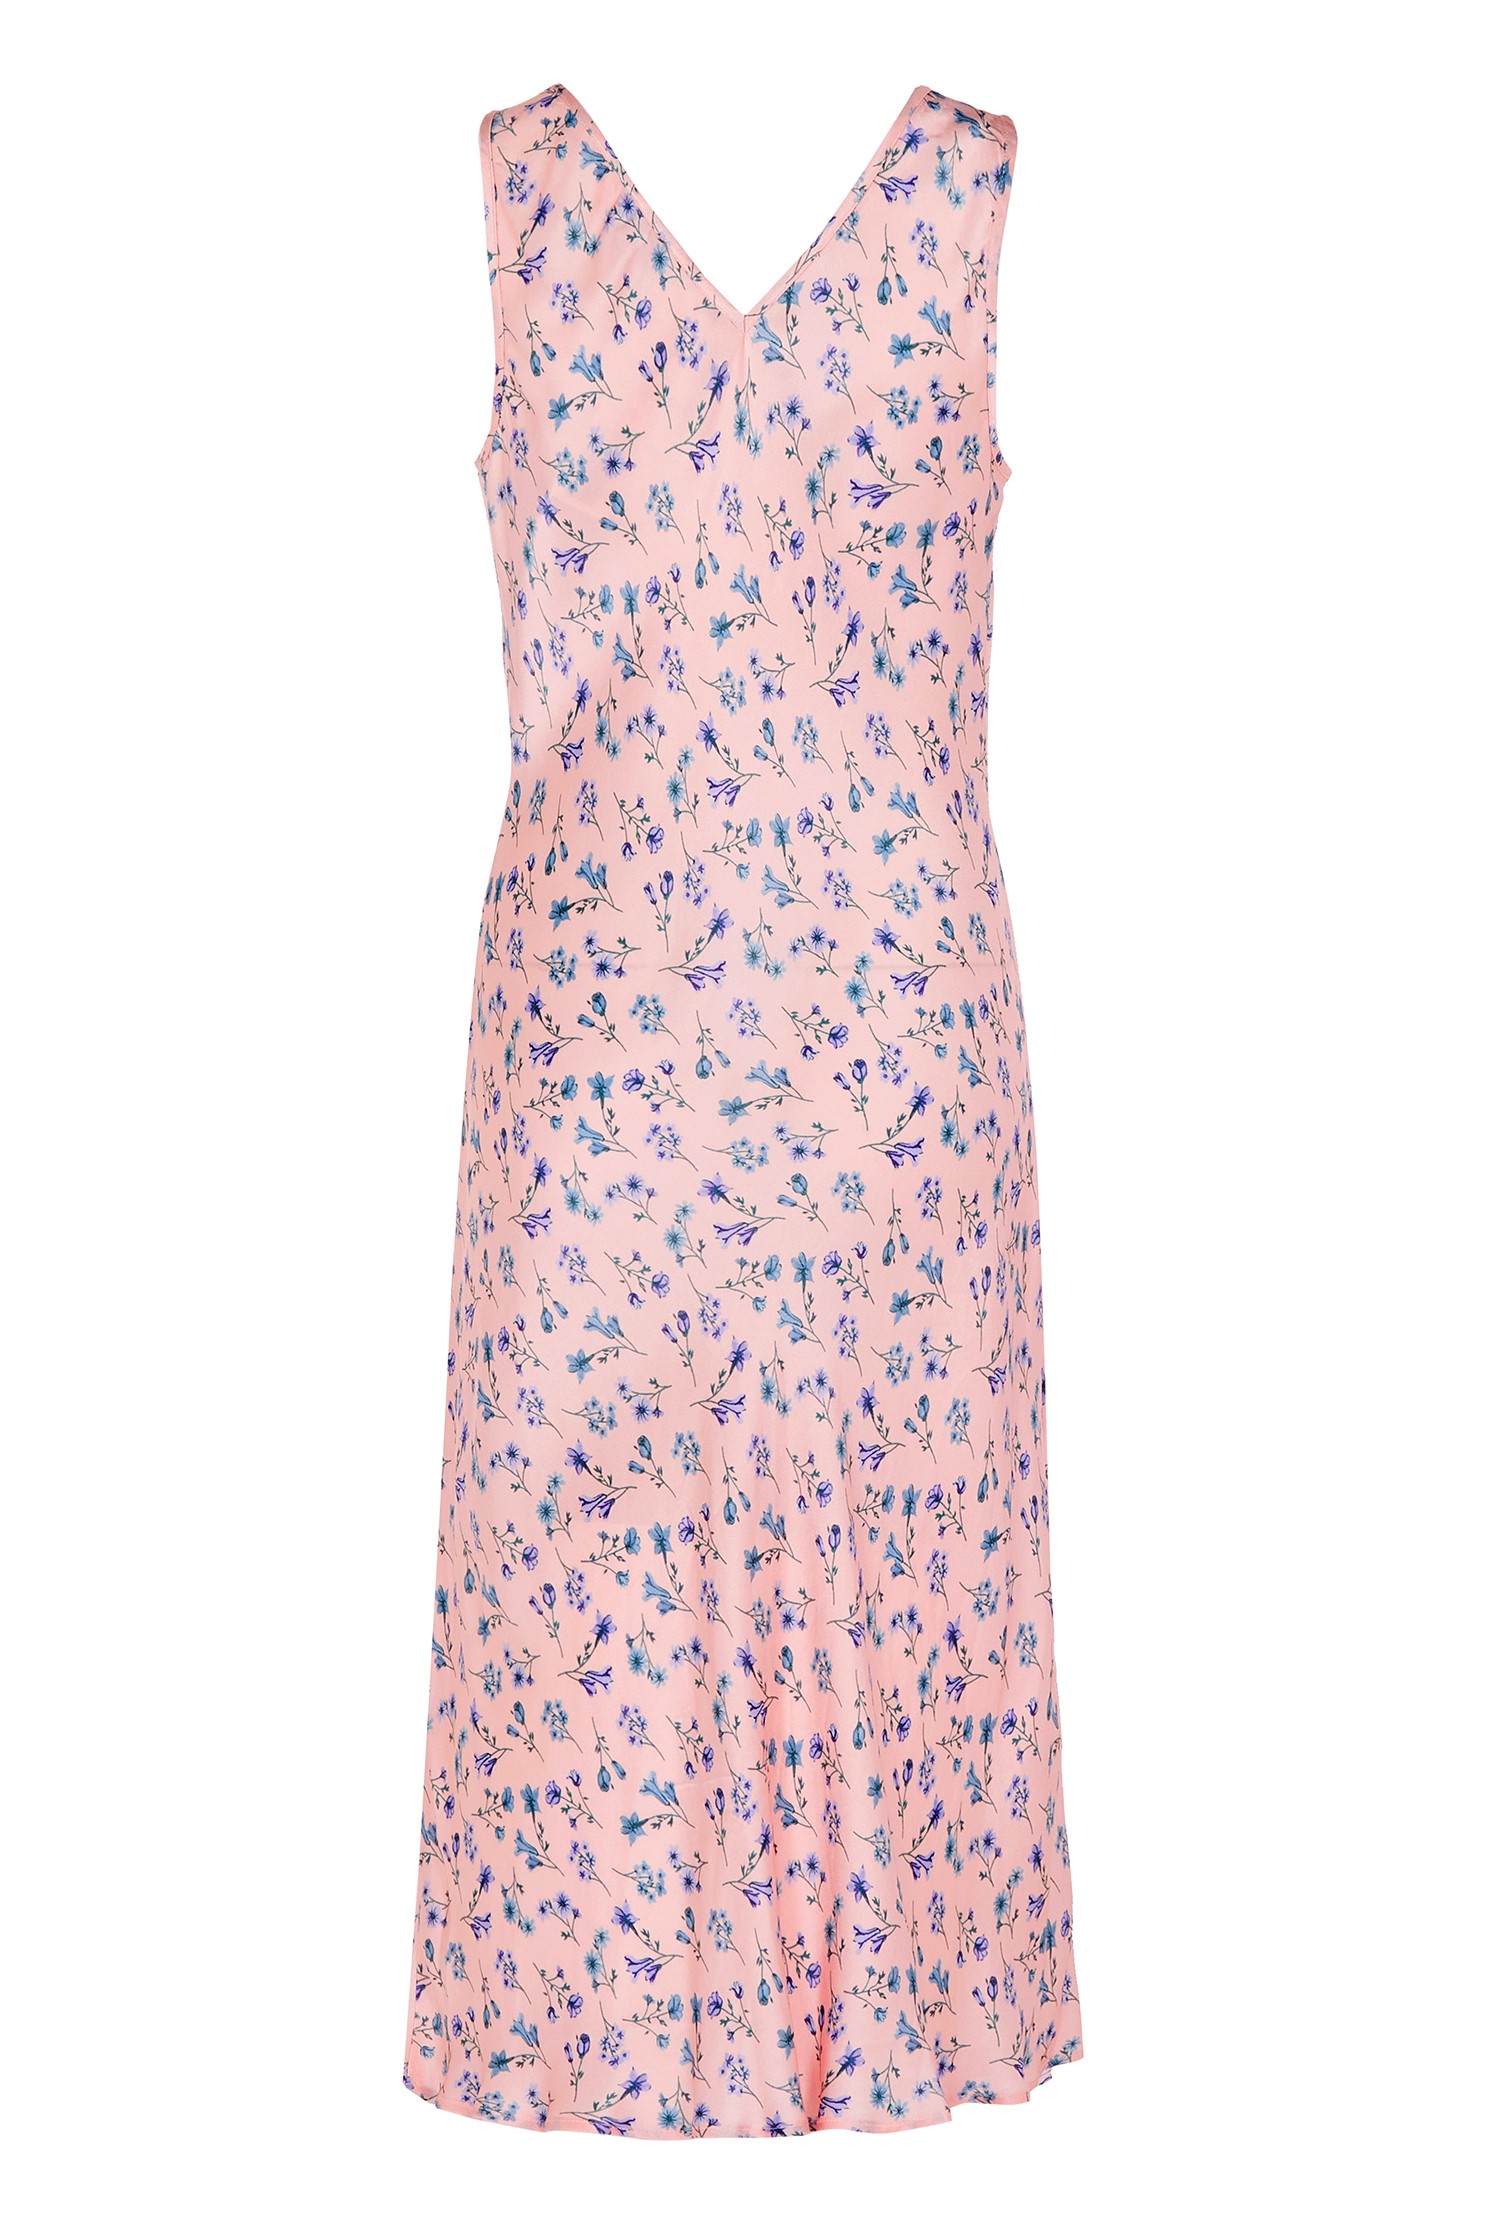 Summer Pink Ditsy Dress | Ghost London